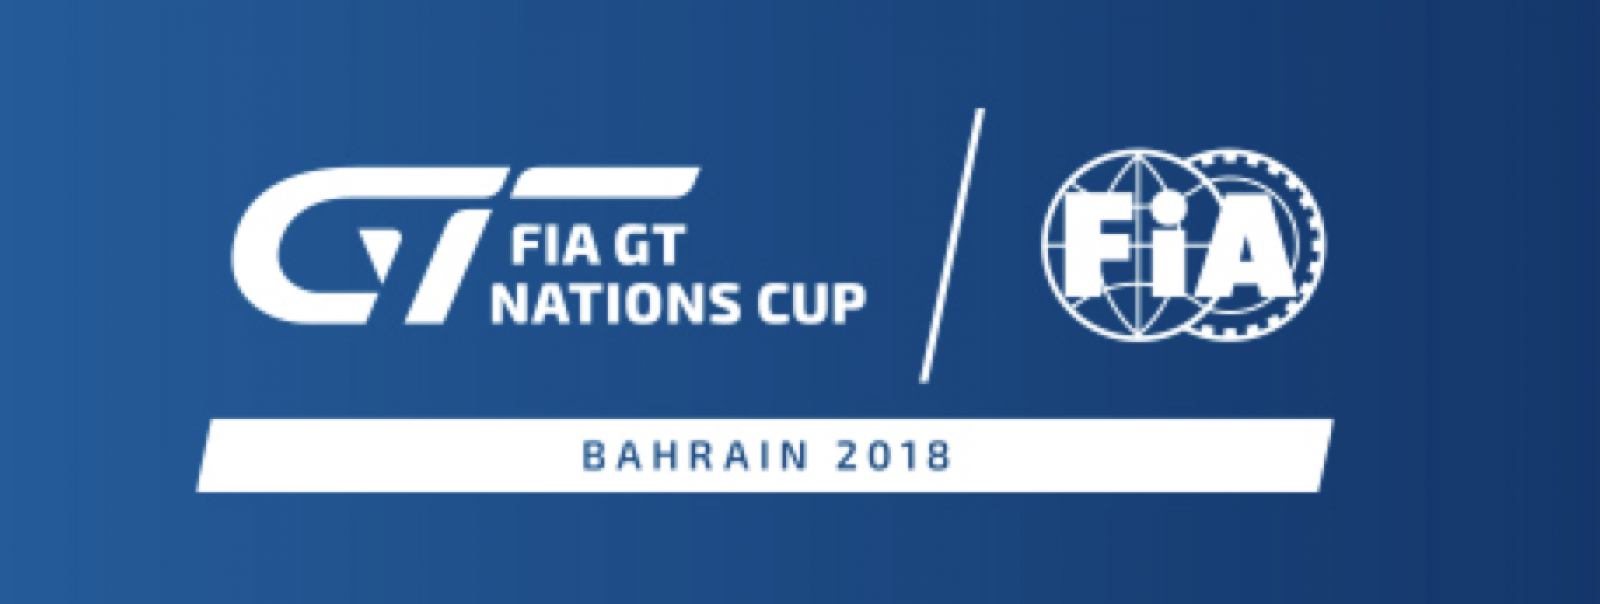 FIA GT Nations cup to headline new GT Festival in 2018